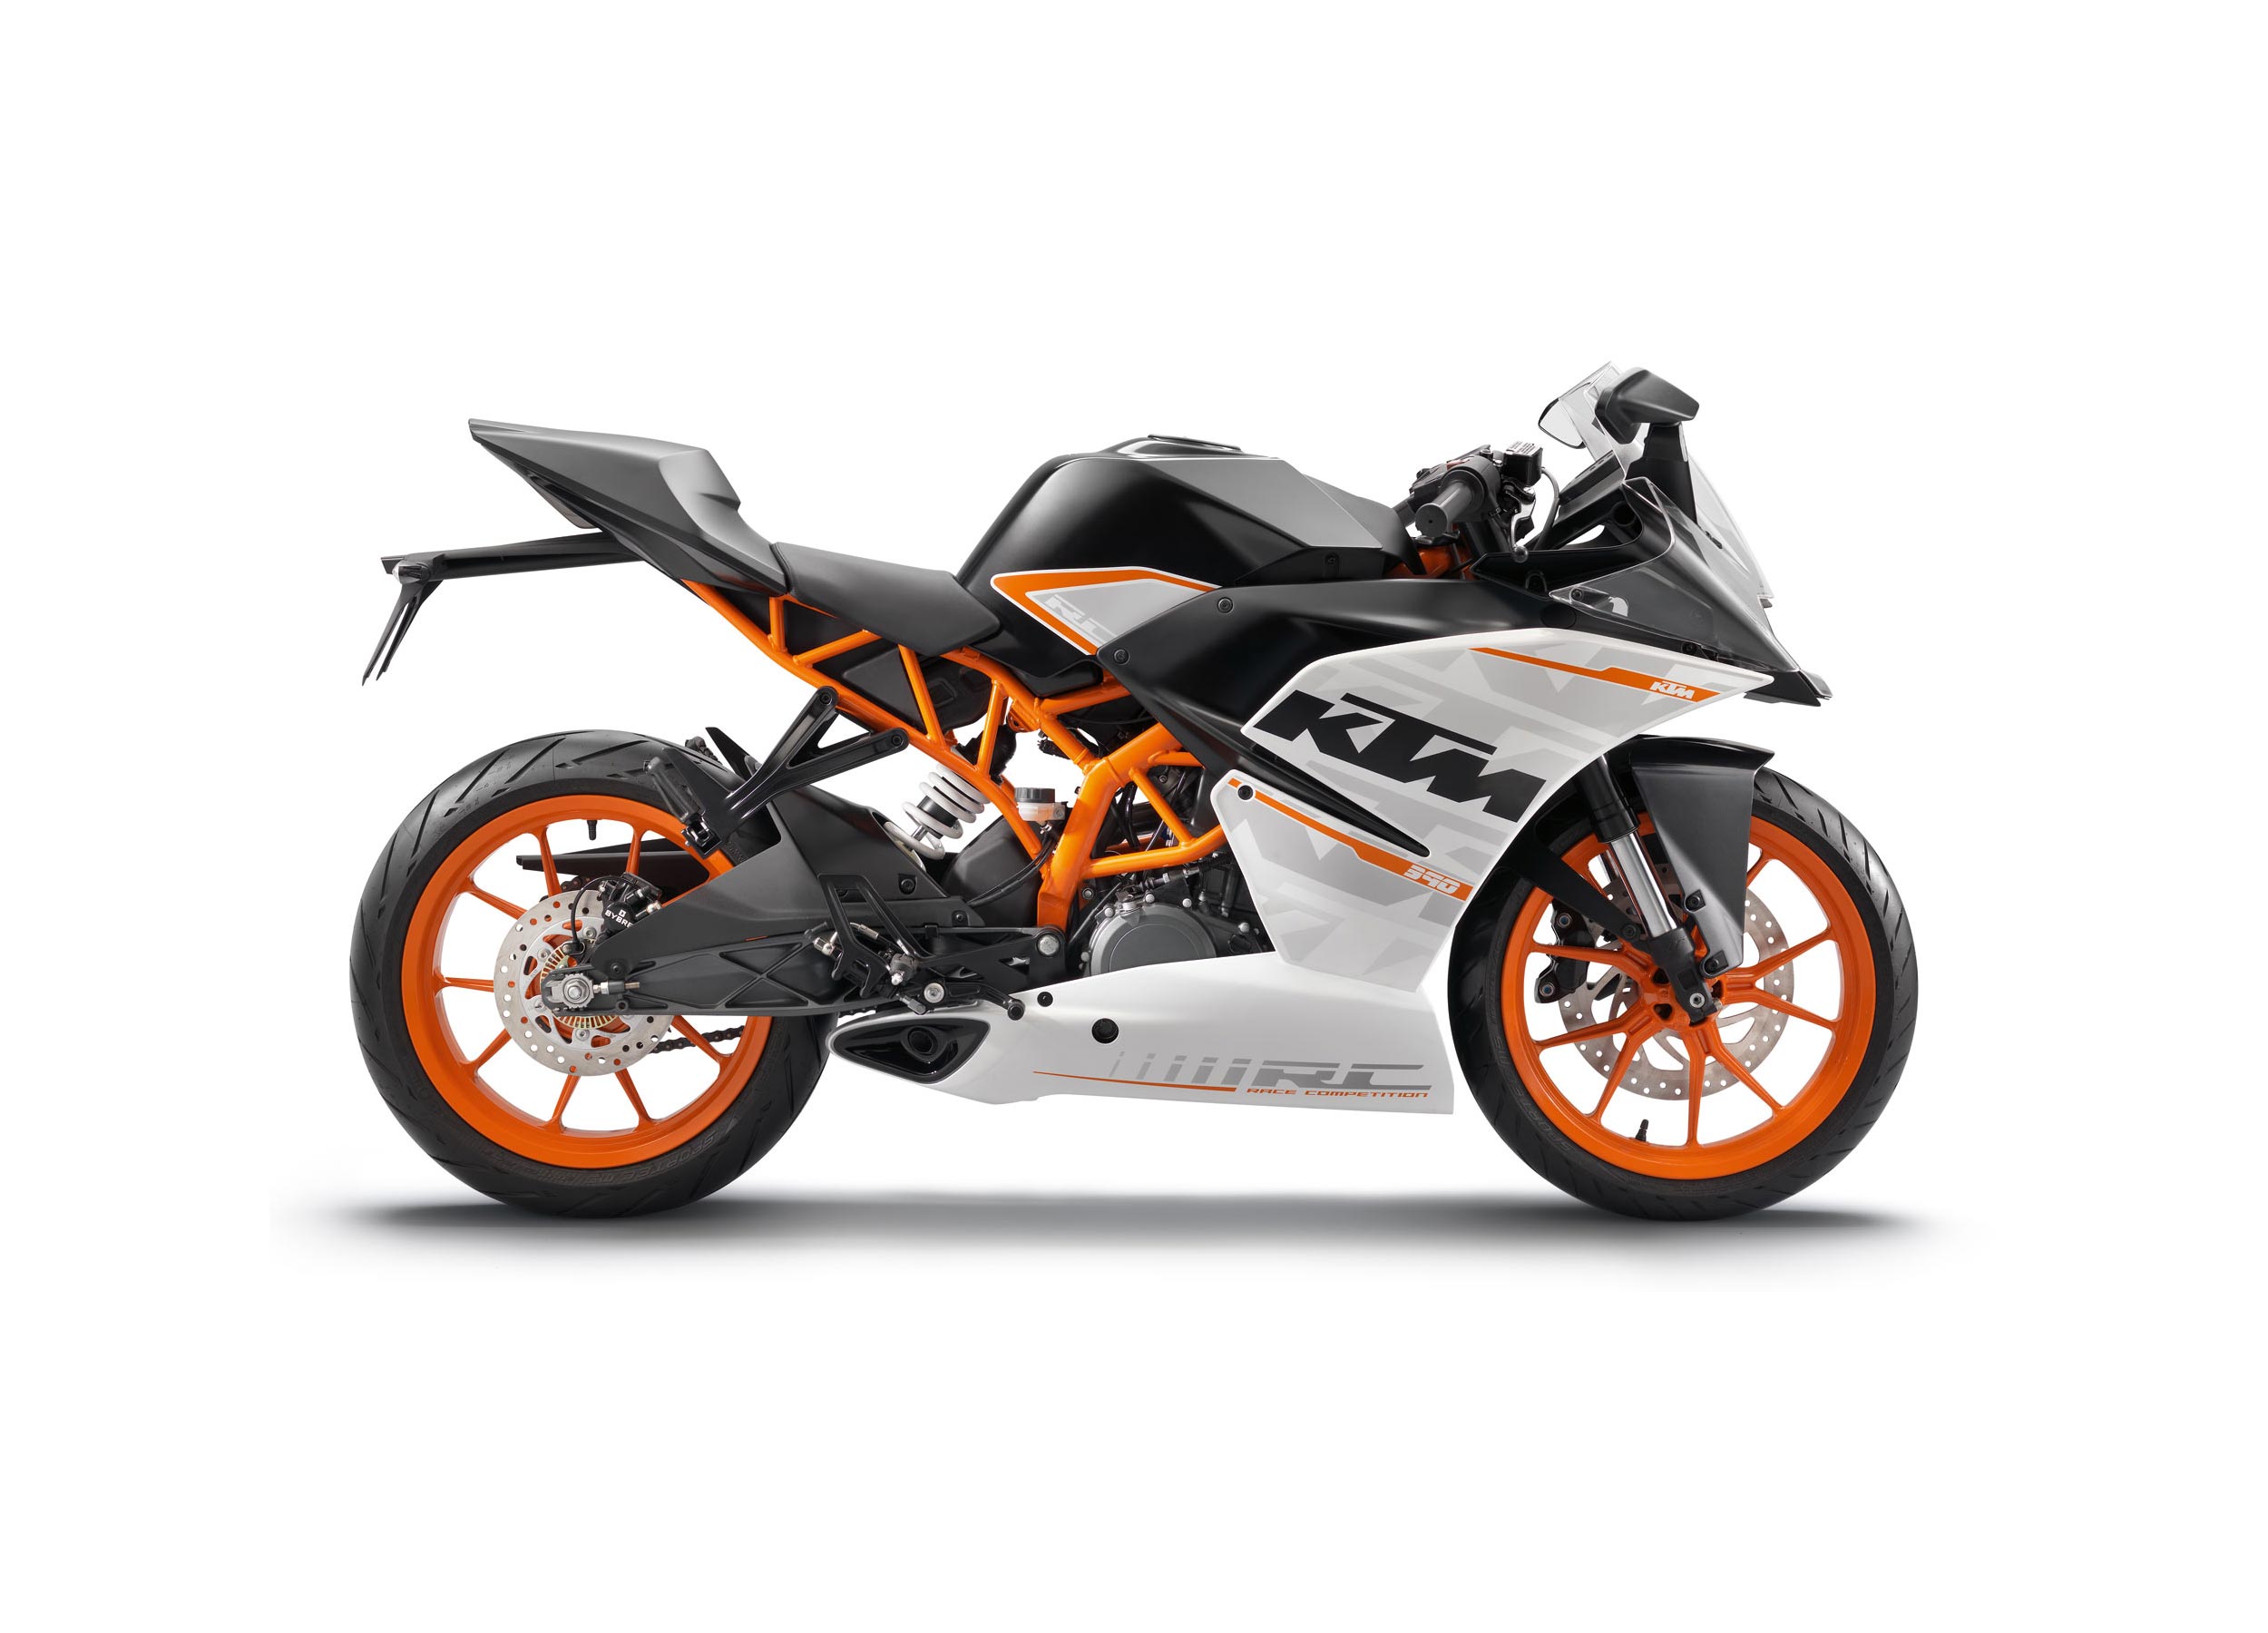 Ktm To Launch Rc200 Rc390 In Mid 2014 In India